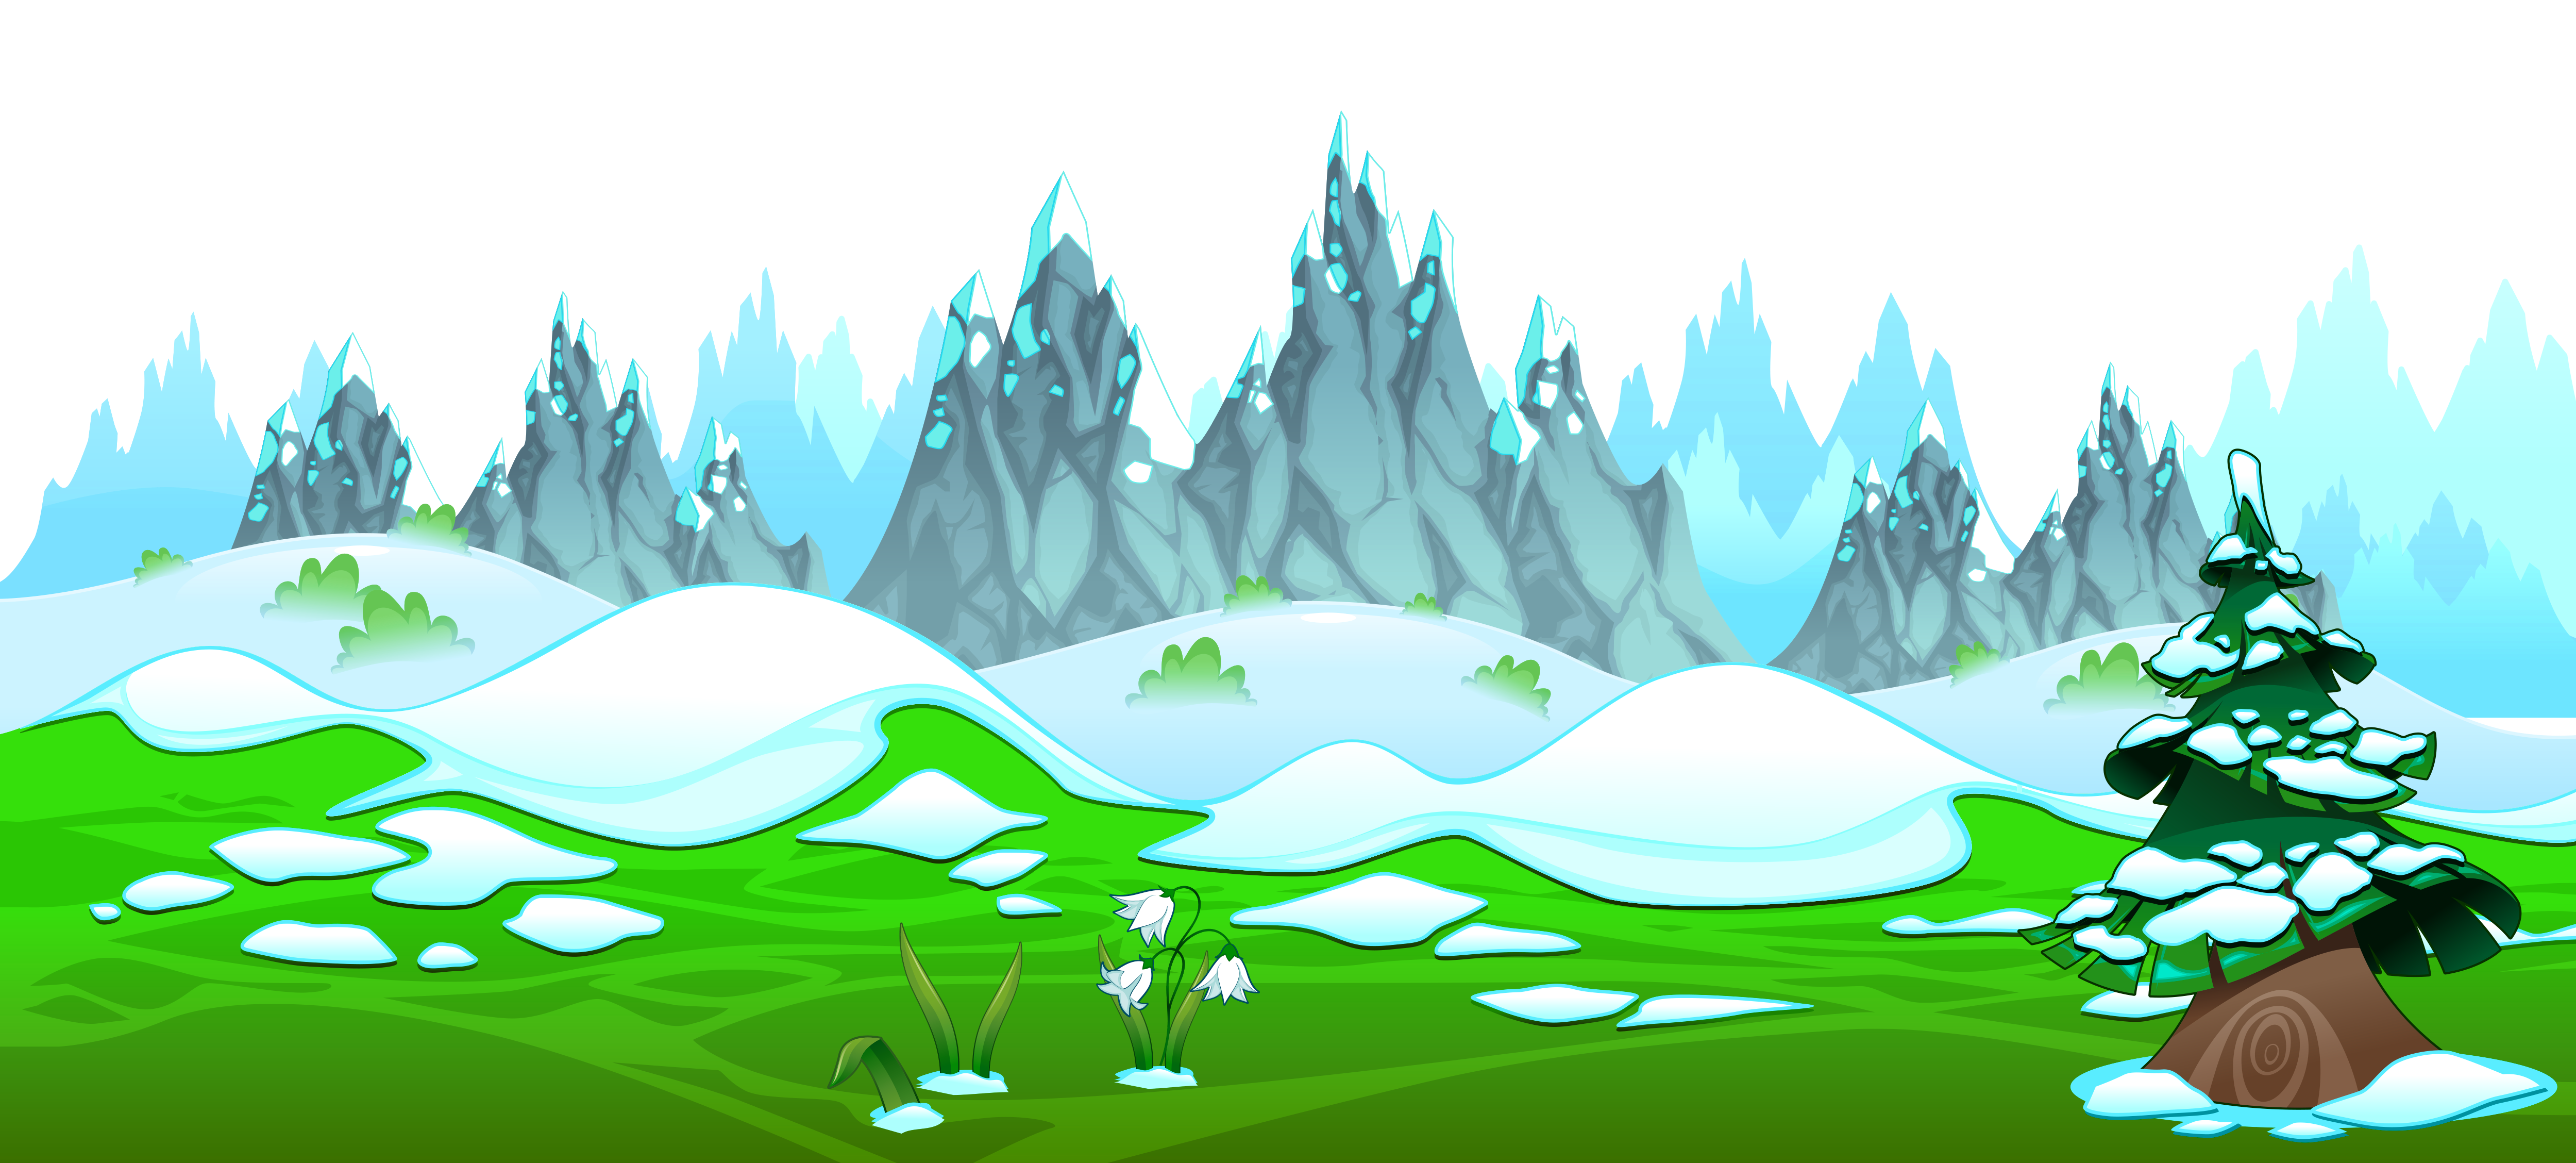 Mountains Clipart - 72 cliparts